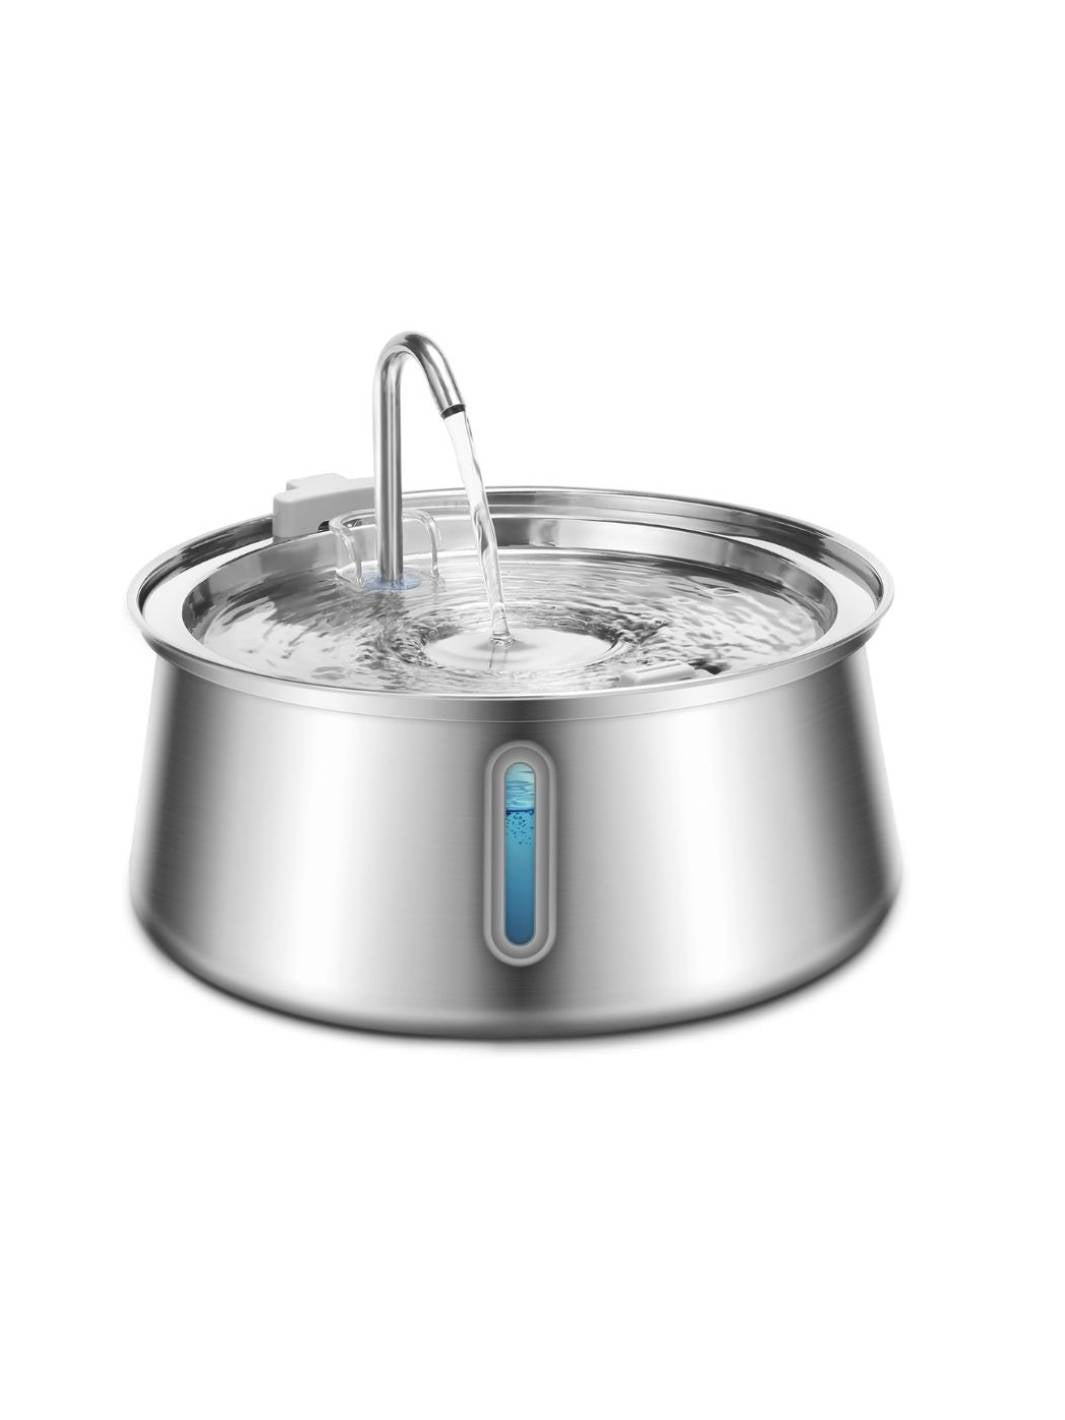 Large Capacity Pet Water Fountain | Large Stainless Steel Dog Water Fountain | Automatic Water Feeder